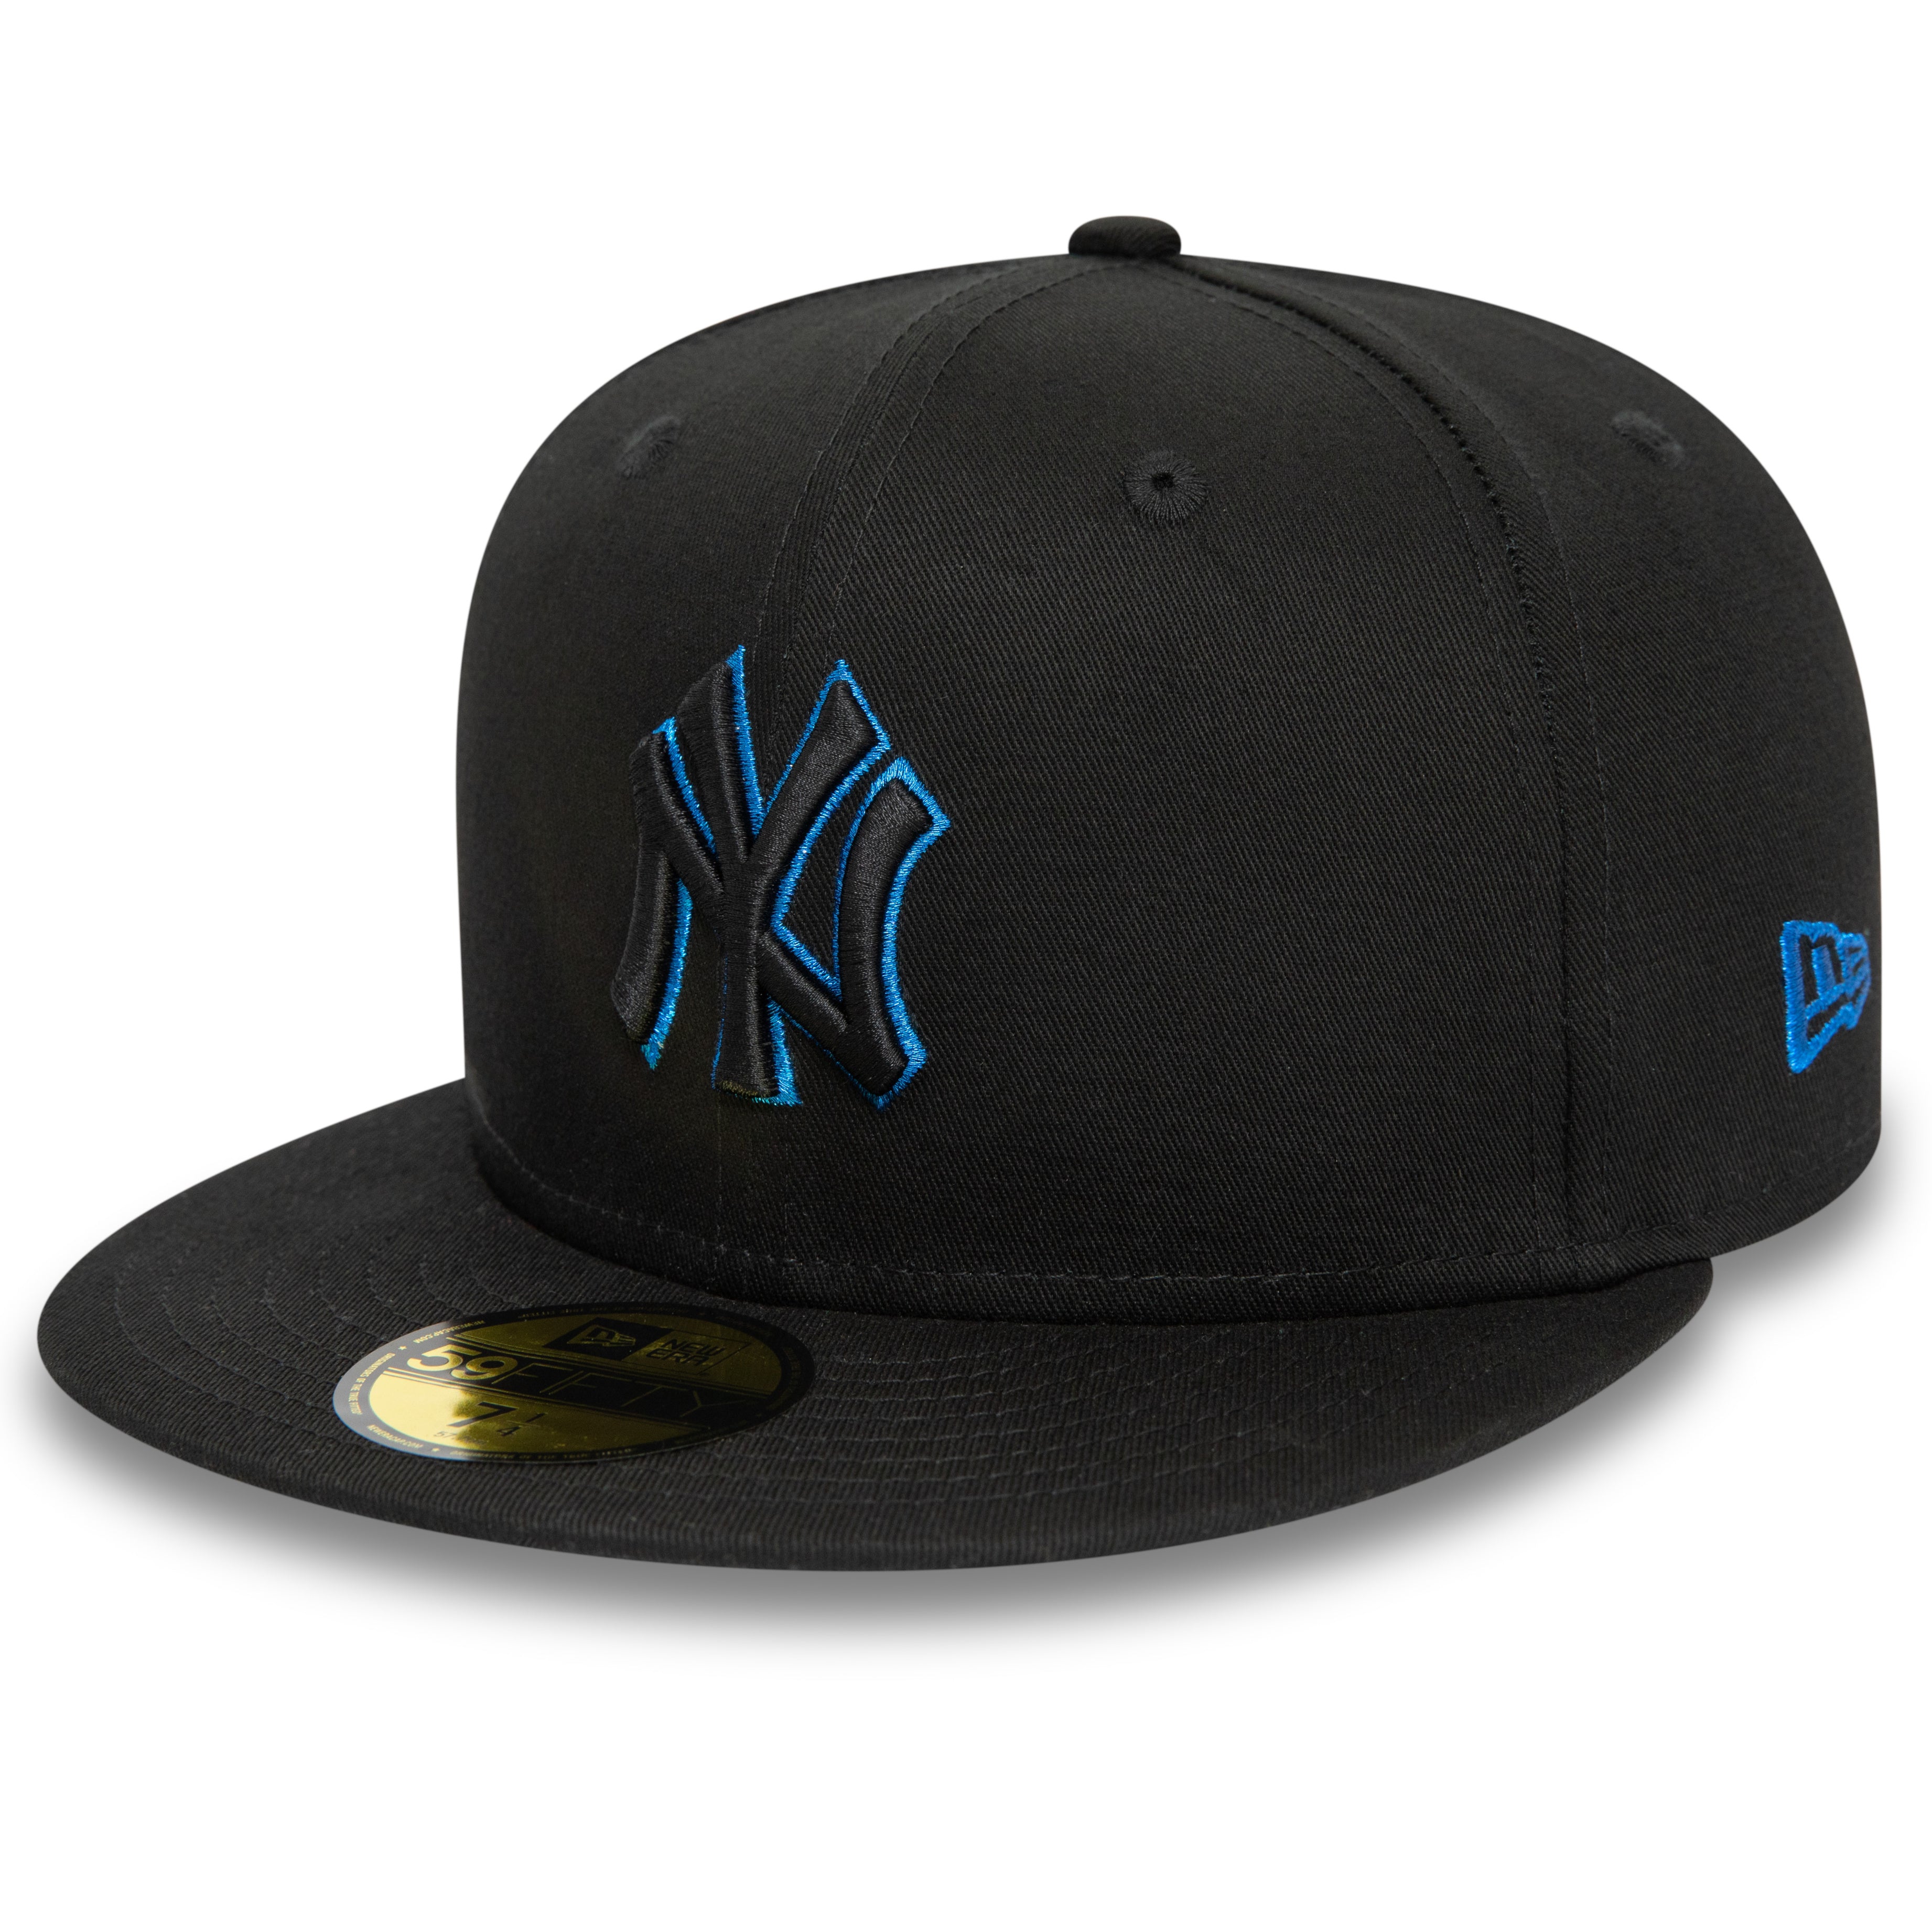 NEW ERA 59FIFTY MLB NEW YORK YANKEES METALLIC OUTLINE BLACK FITTED CAP